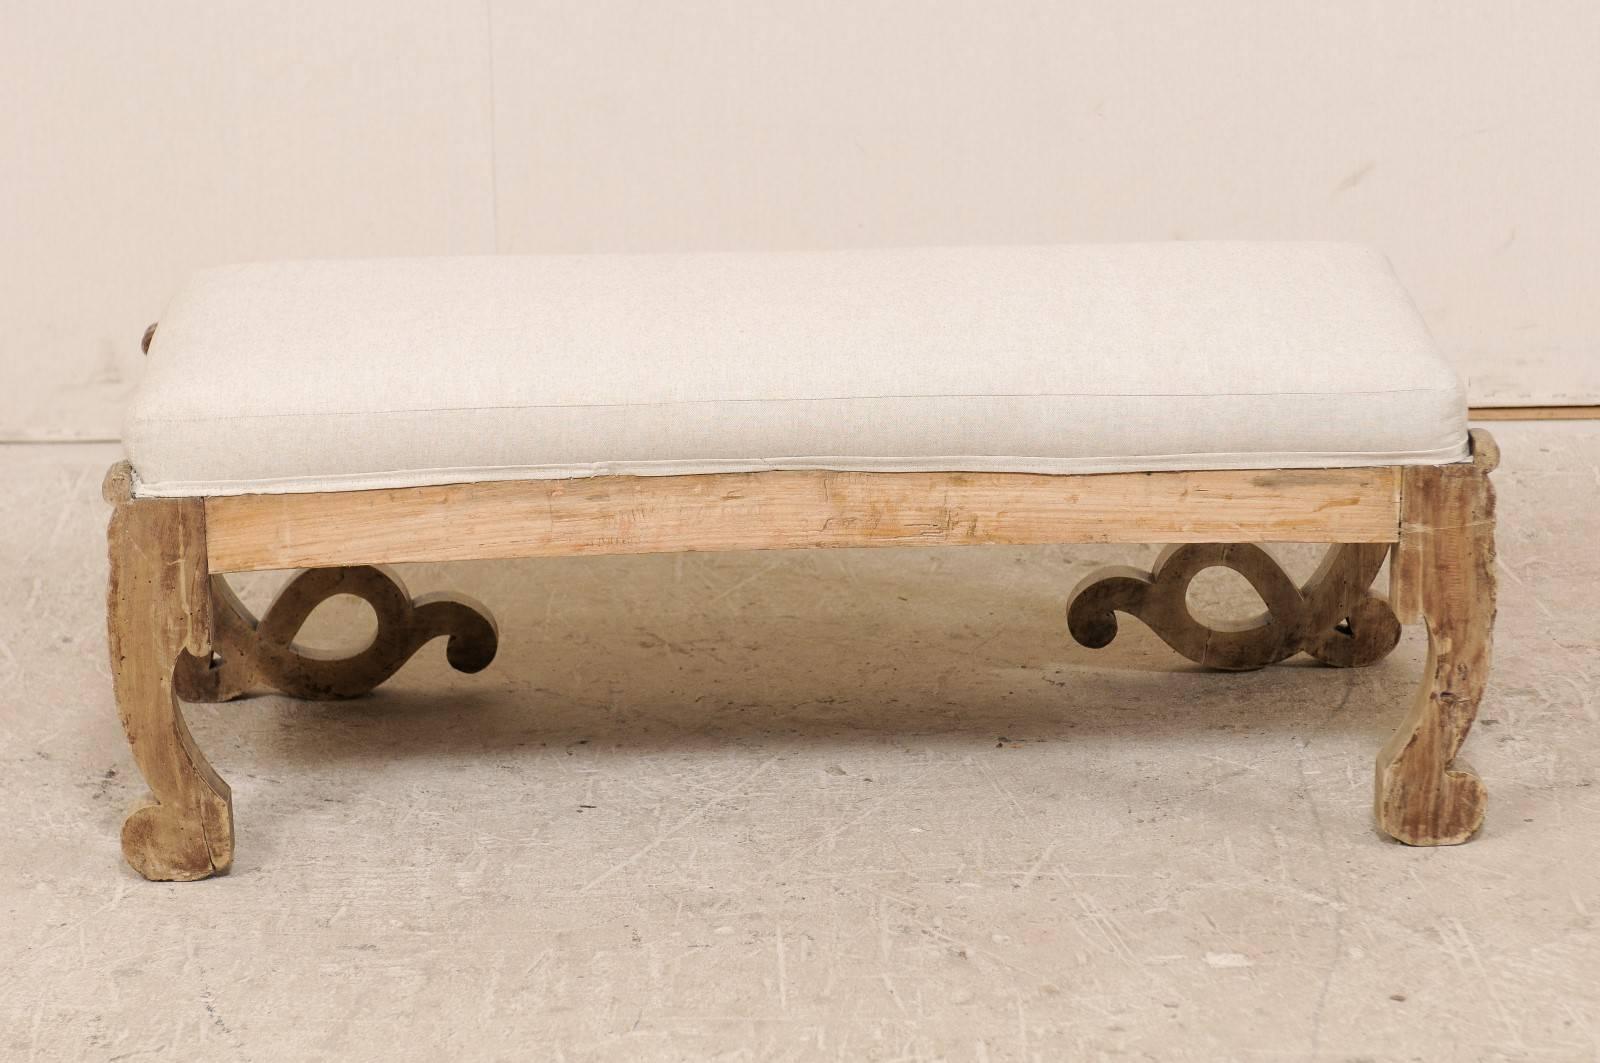 Upholstery Swedish, Early 20th Century Light Colored Wood Bench with Unique Legs